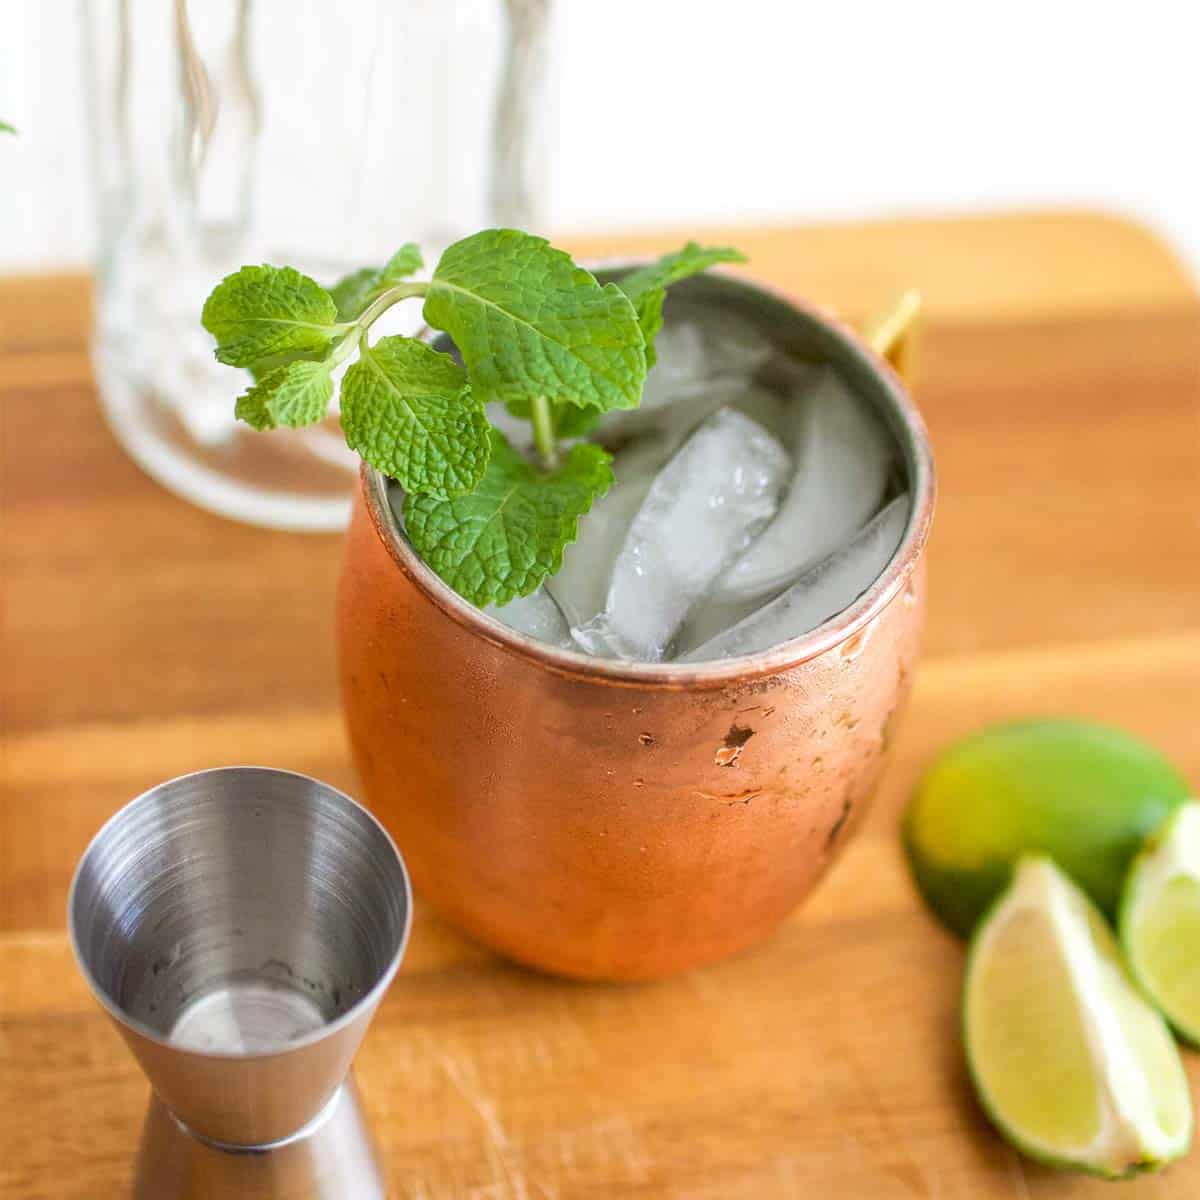 Moscow mule recipe